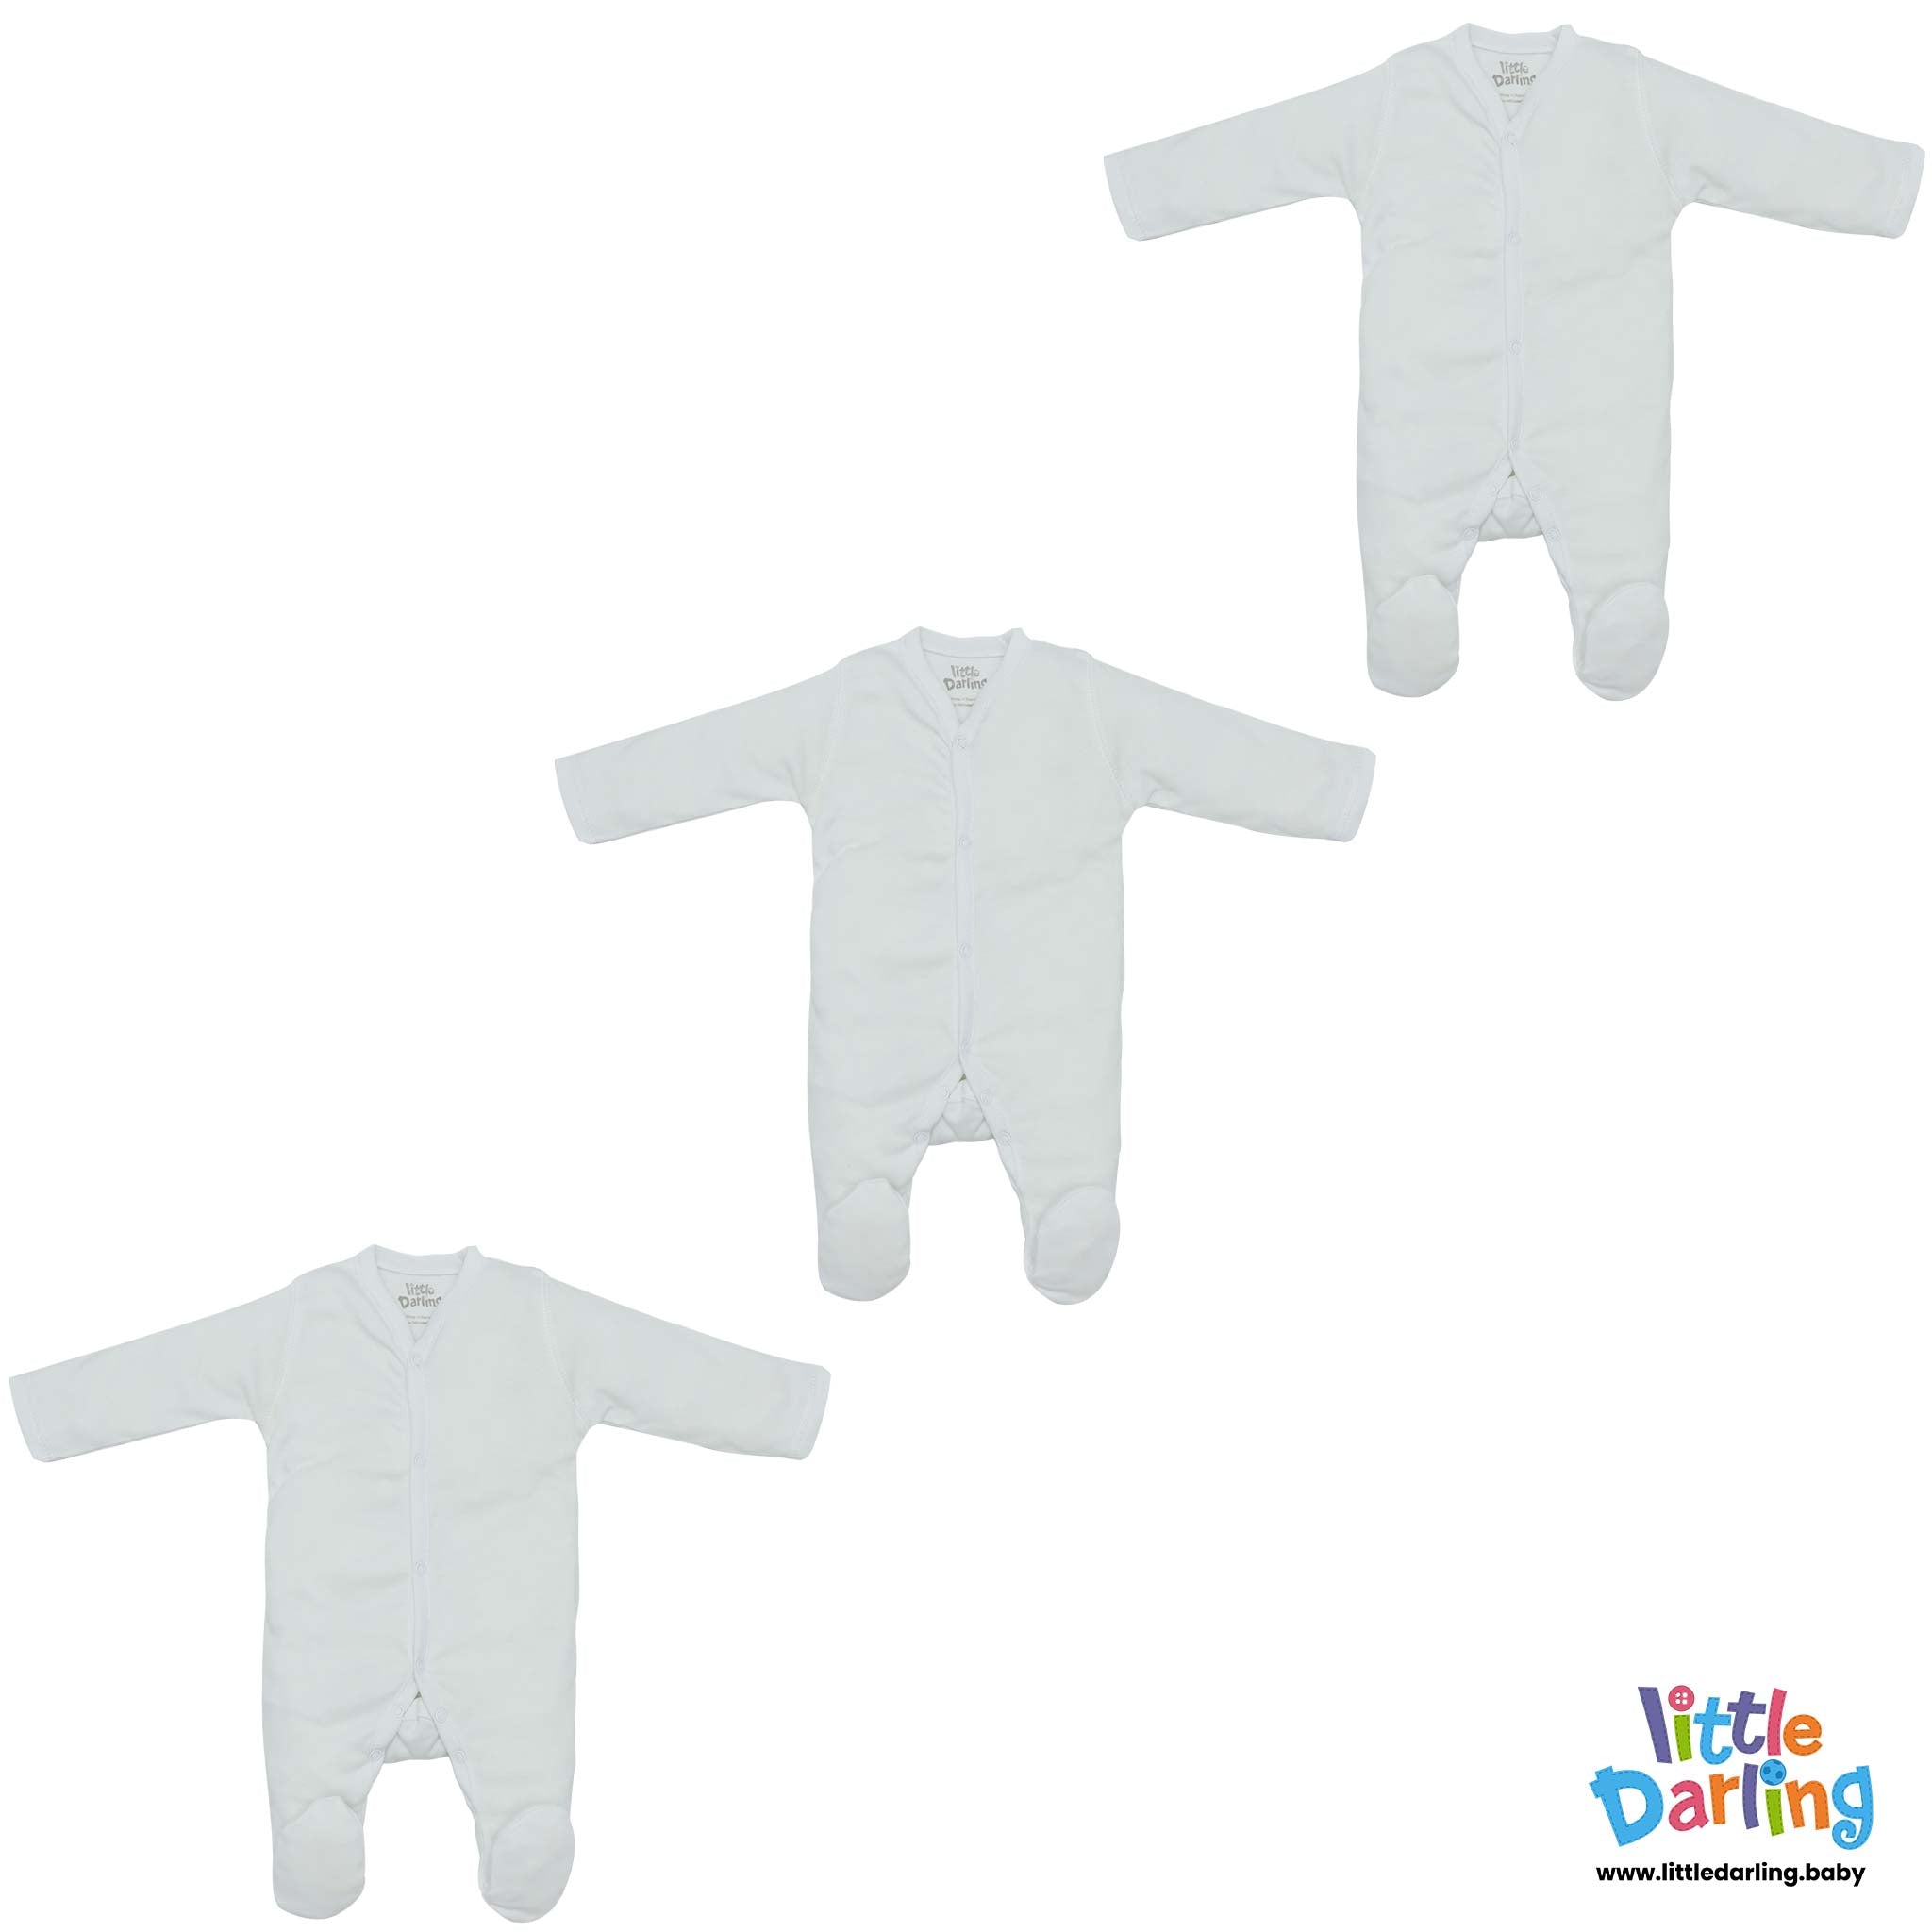 Baby Sleepsuit White Color | Little Darling